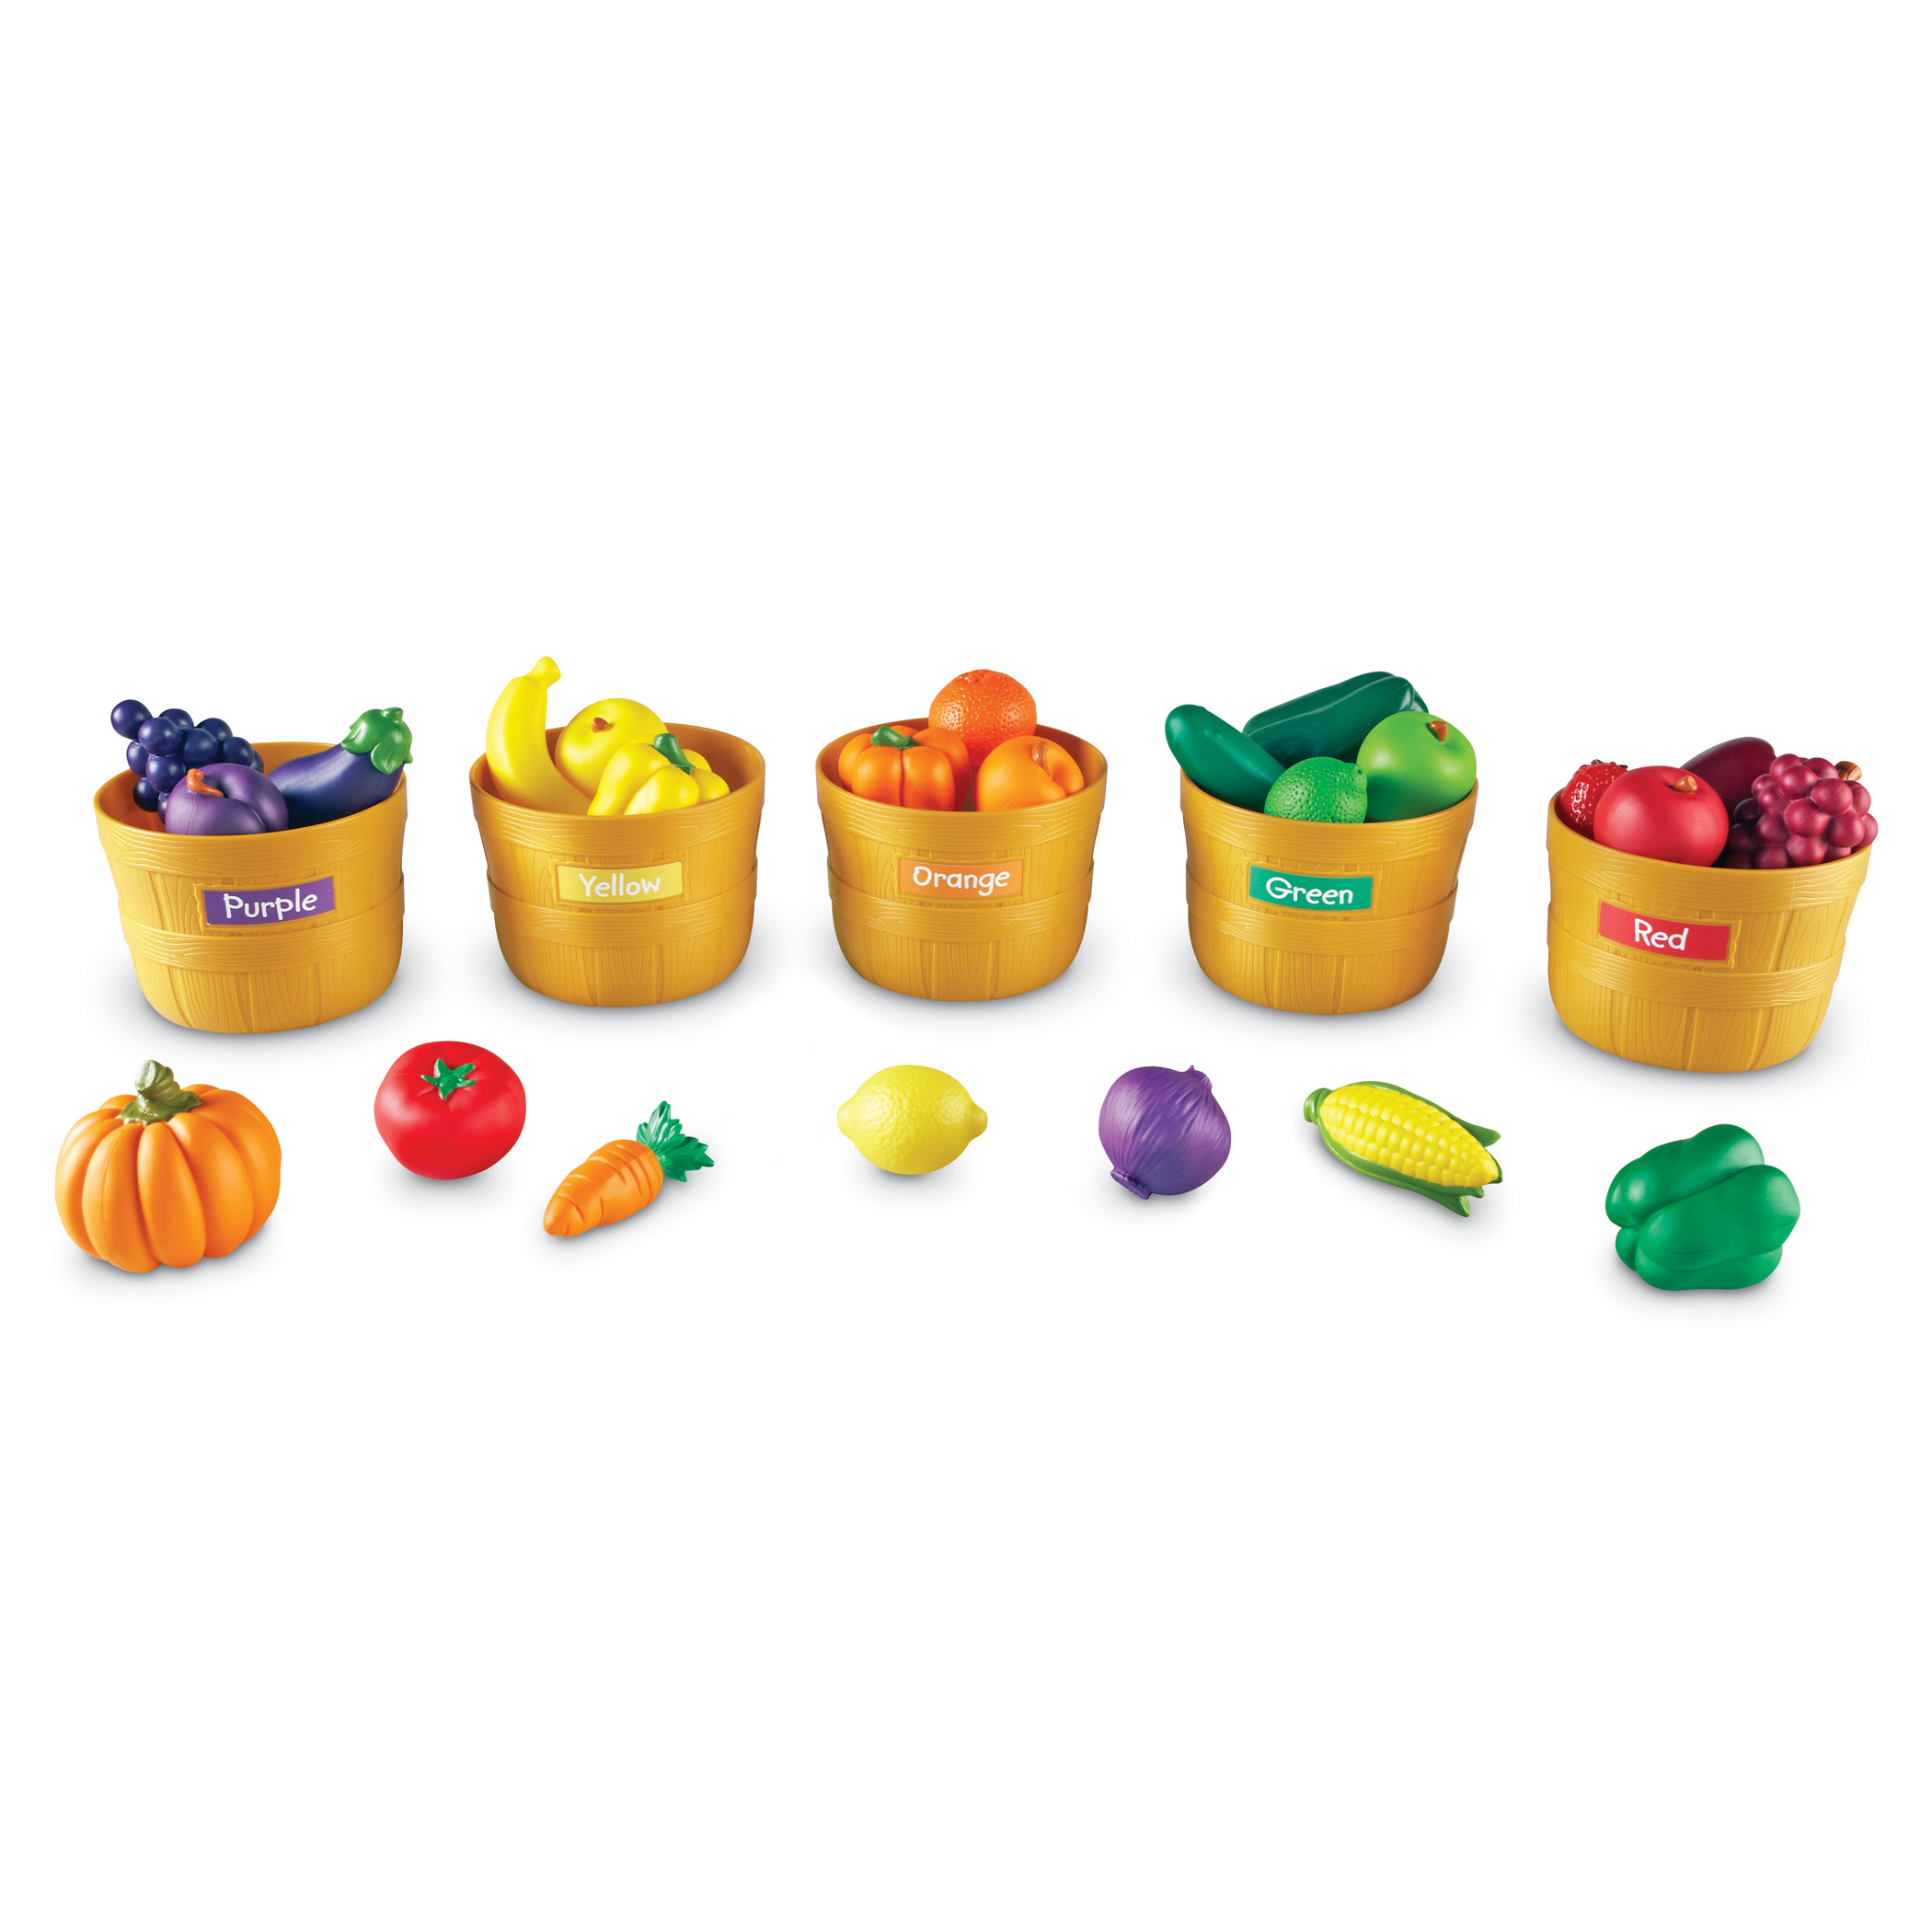 Learning Resources Farmer’s Market Color Sorting Set image number null